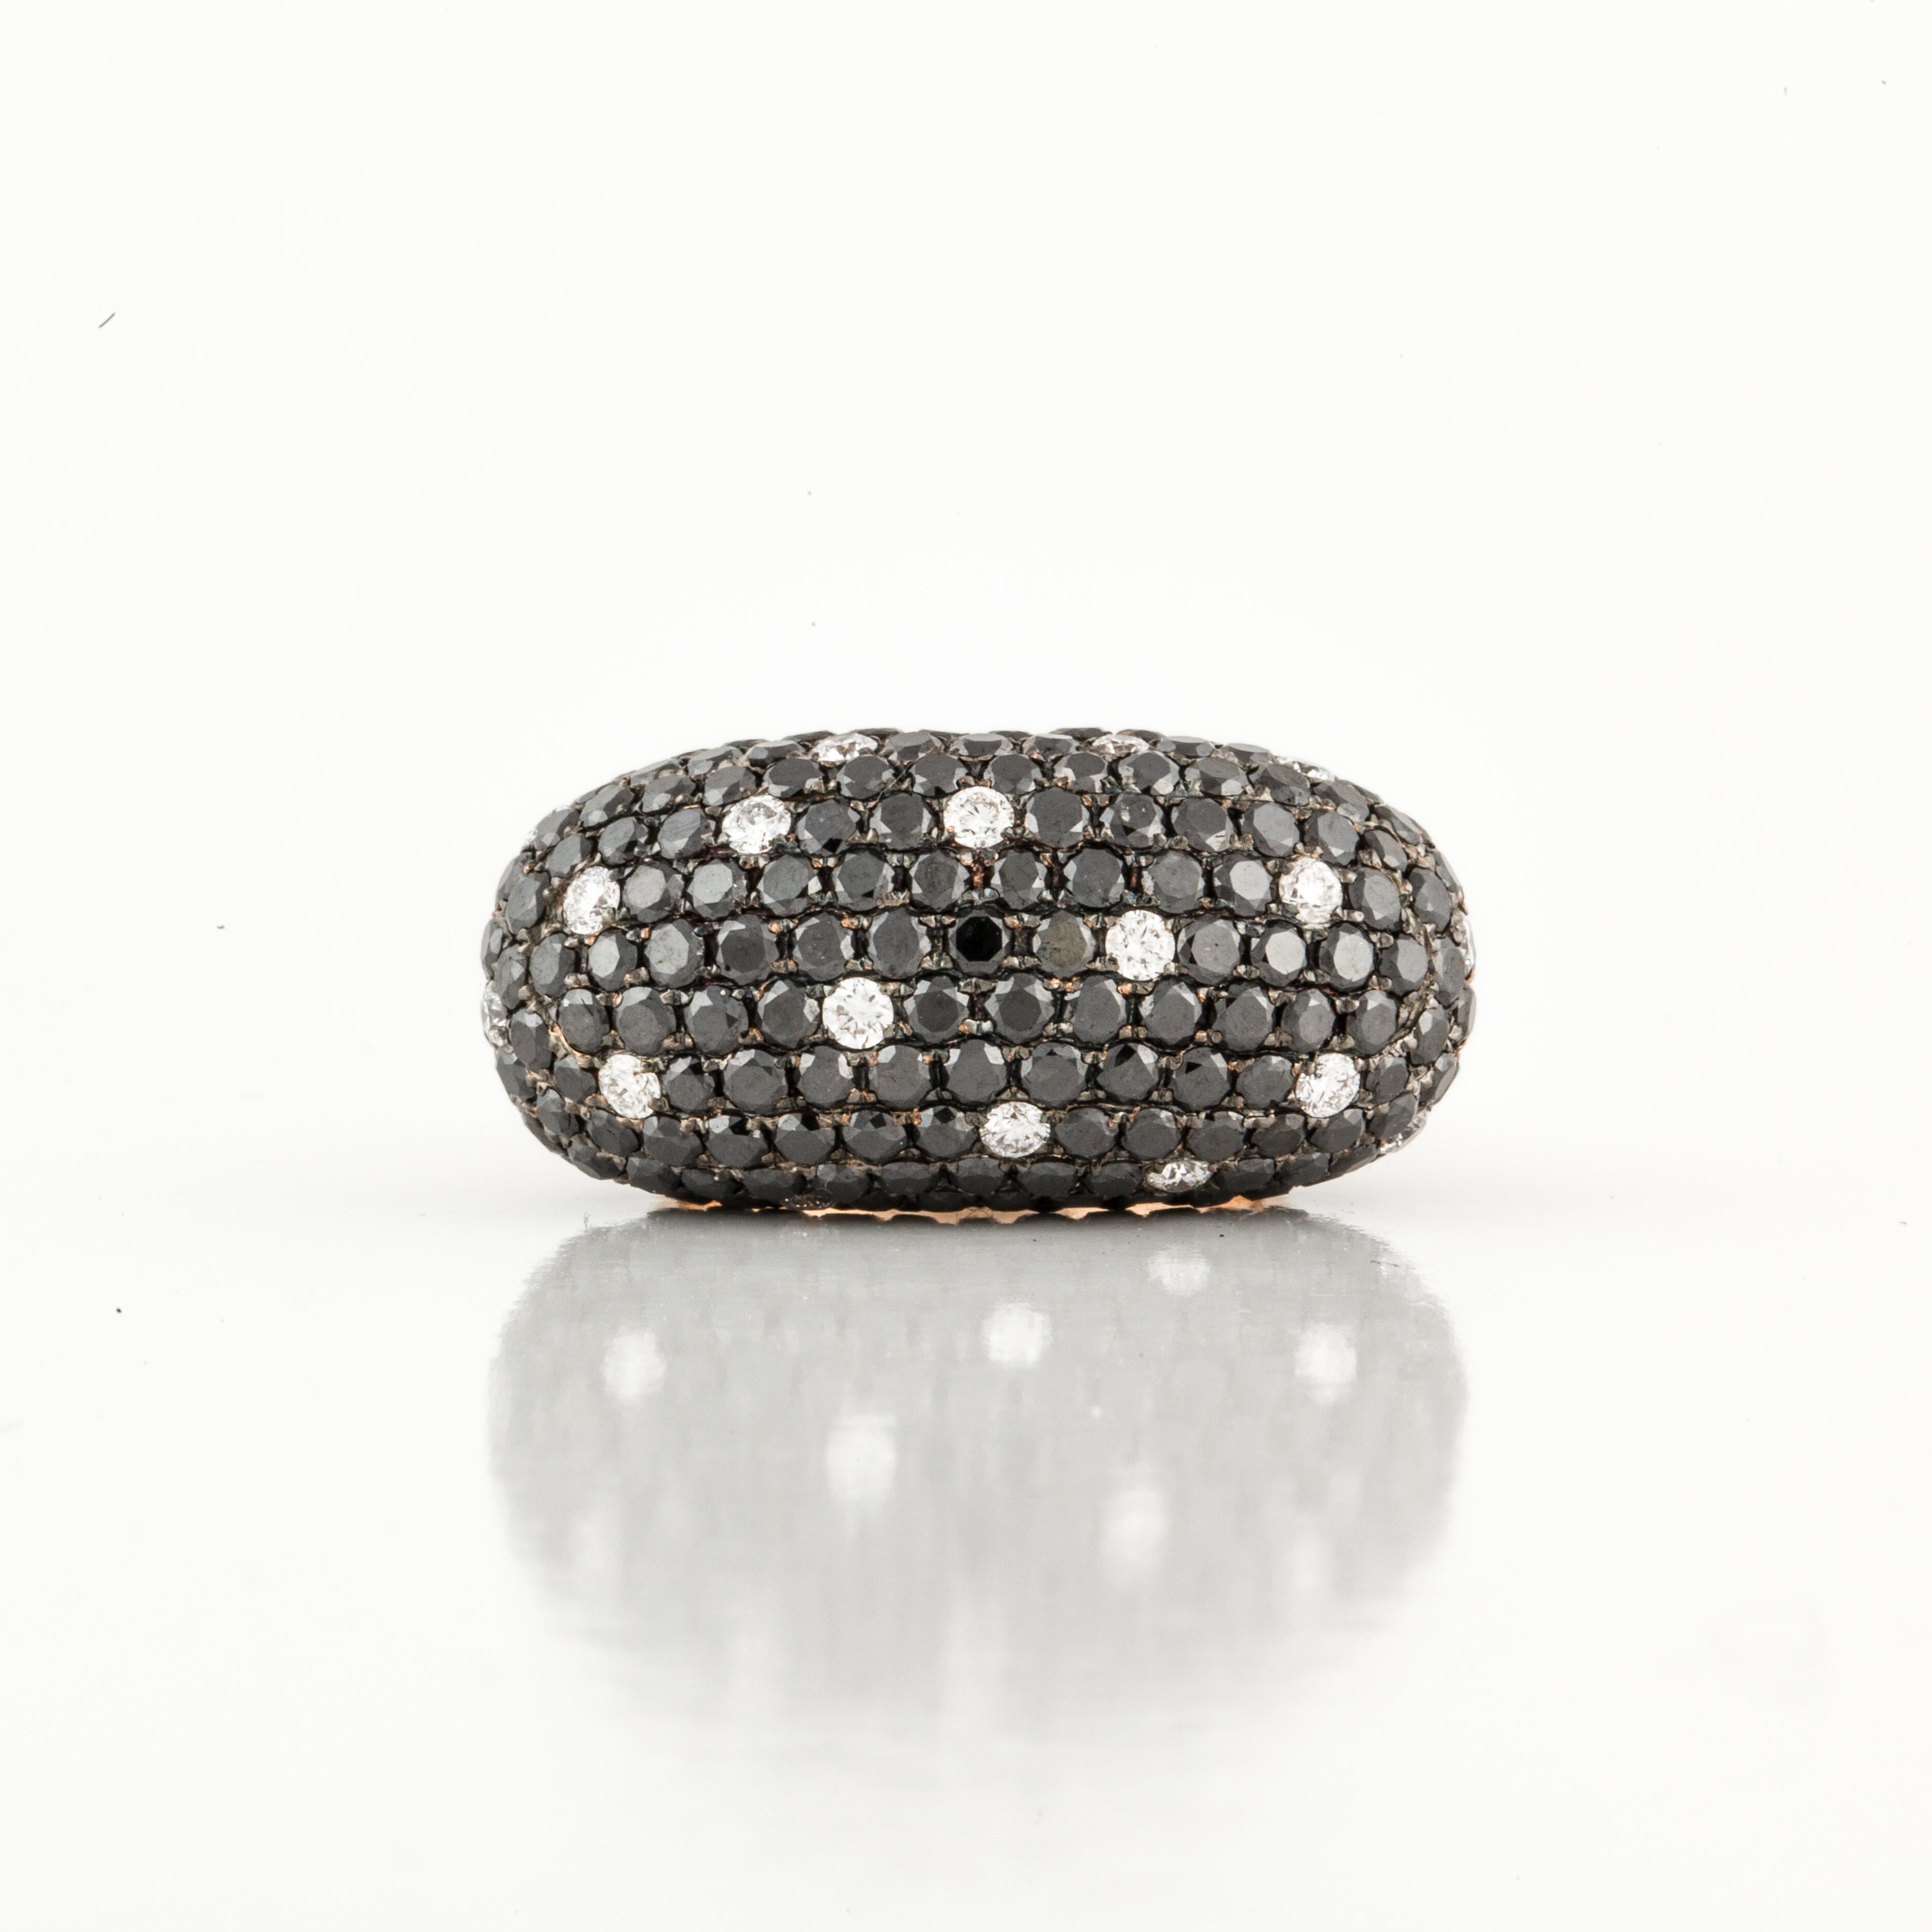 18K rose gold ring with pavé-set black and white diamonds.  There are 26 round diamonds that total 2.10 carats; G-H color and VS1-2 clarity.  There are also 208 round black diamonds that total 7 carats.   Total carat weight is 9.10 carats. 